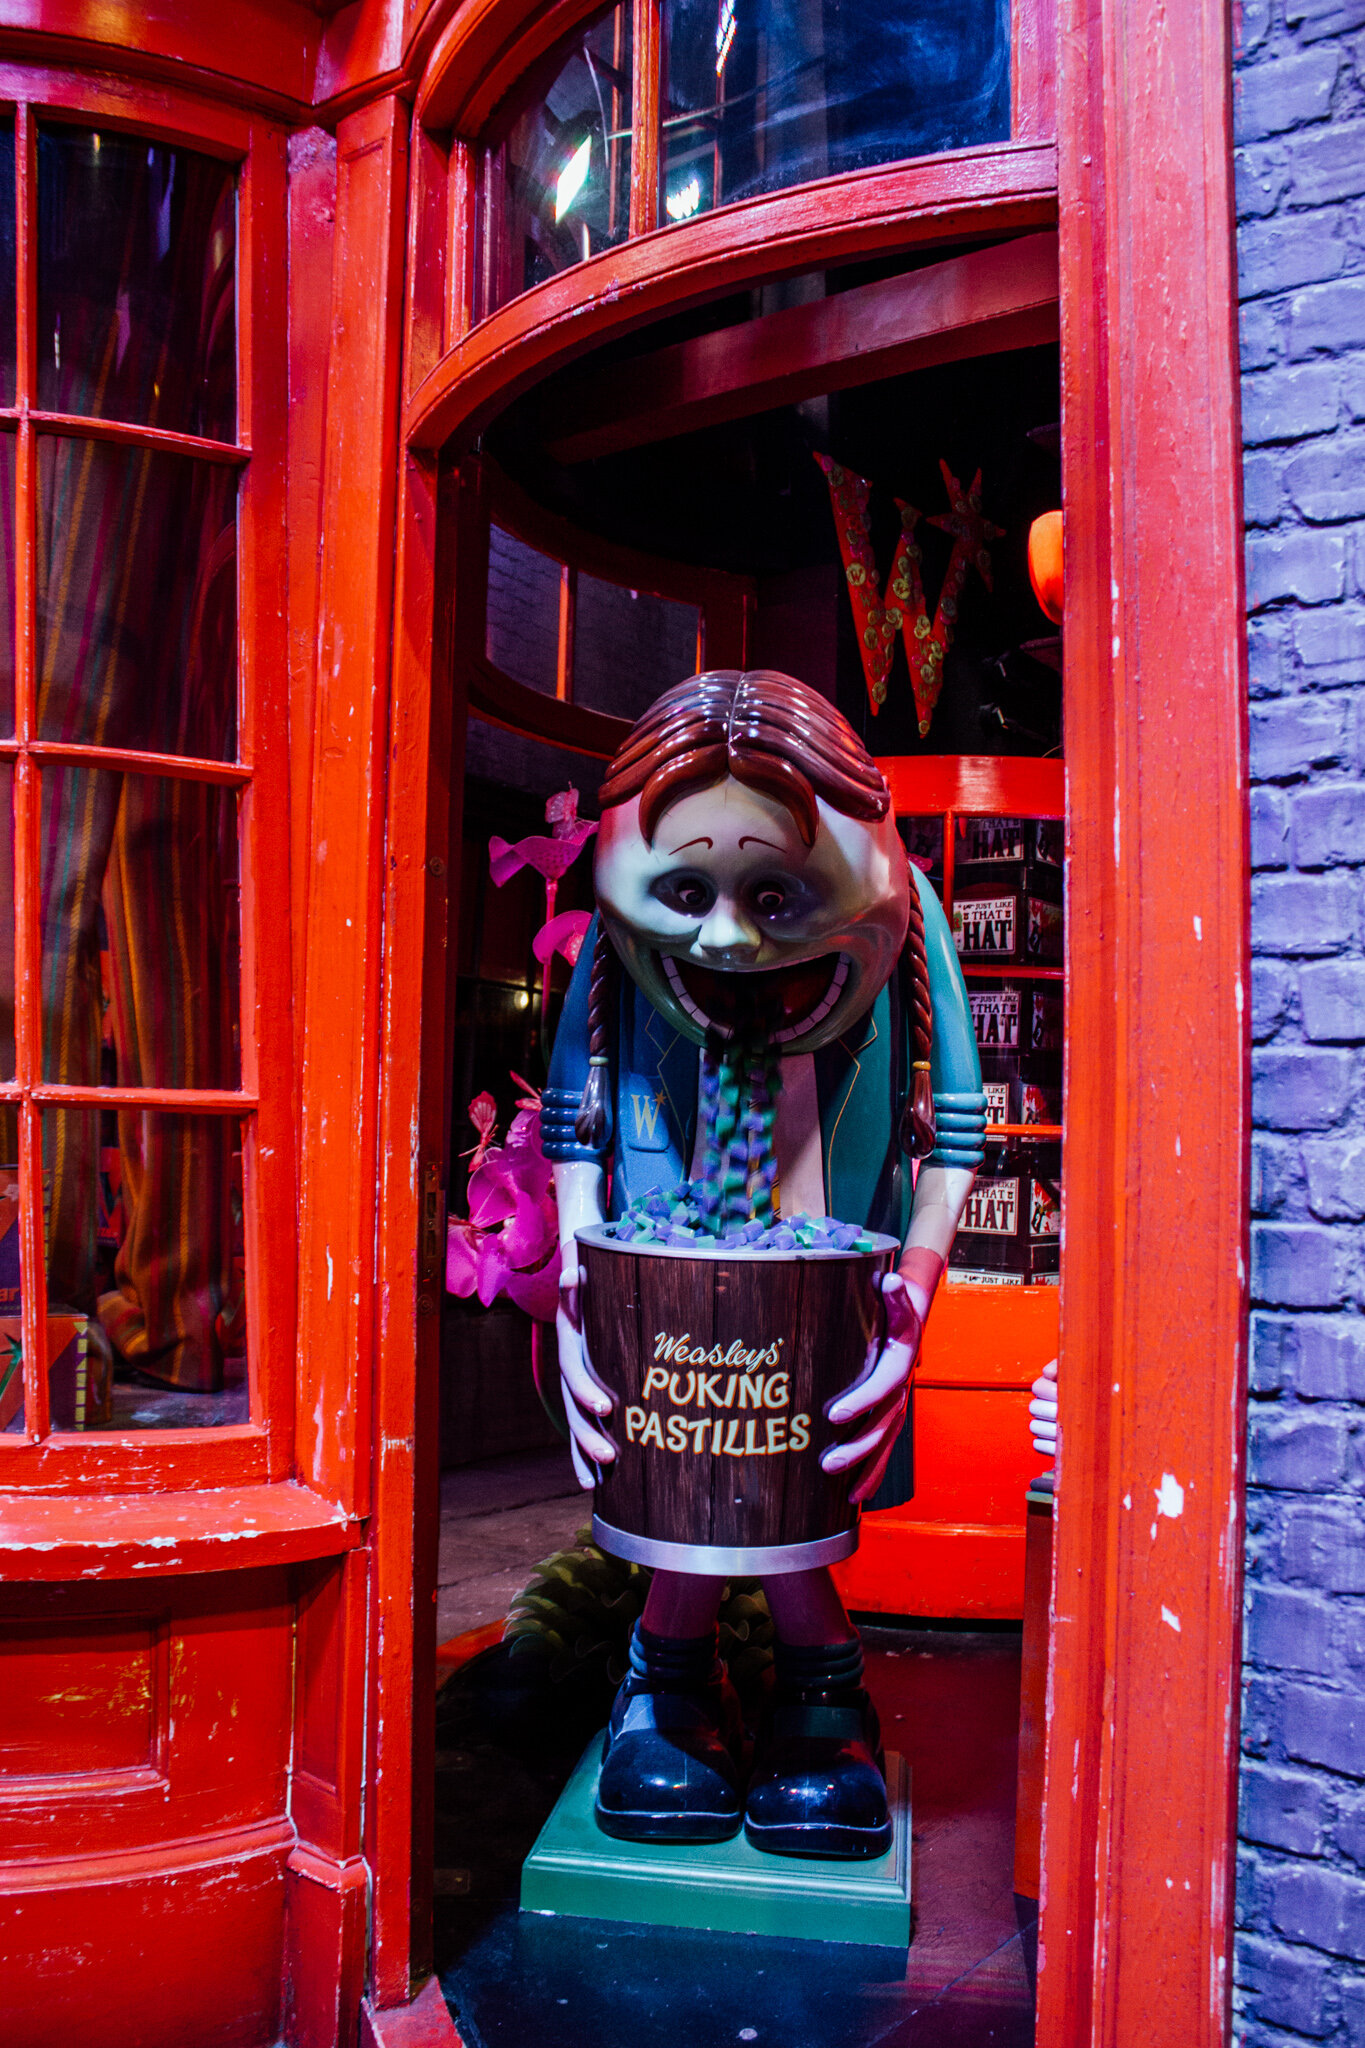 Diagon Alley at Harry Potter Studios in the UK